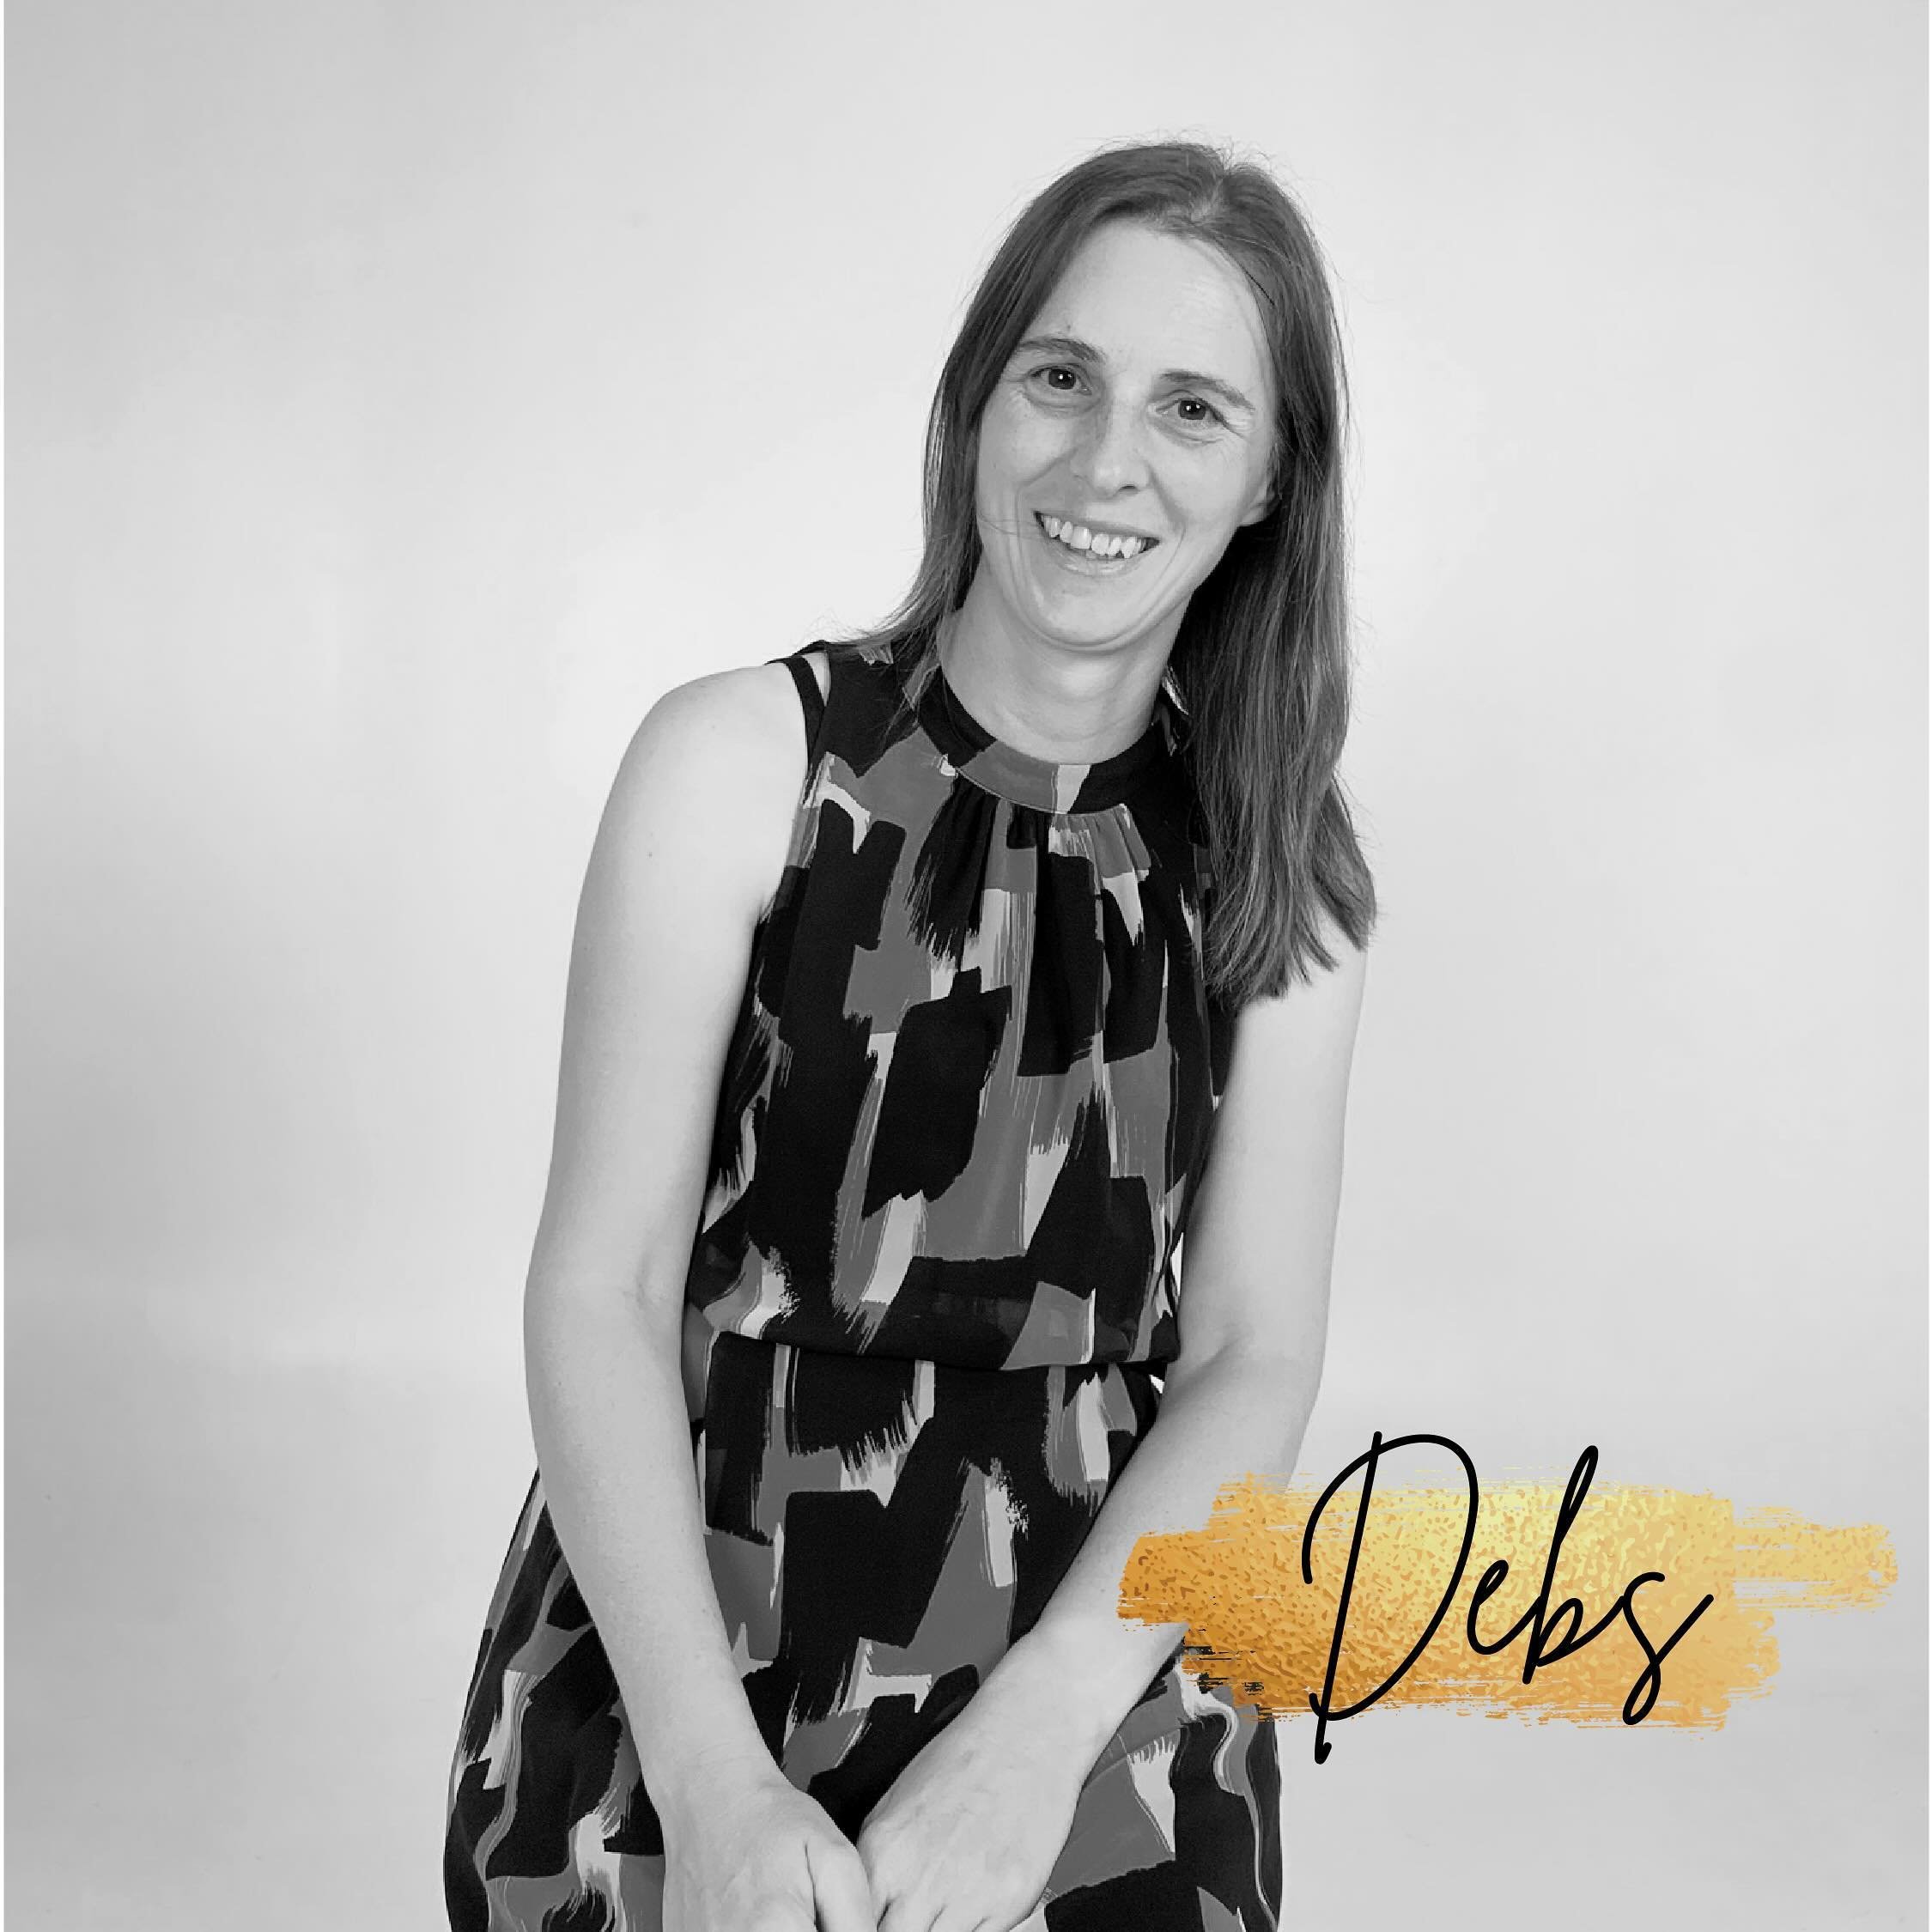 Say hello 👋🏽 and welcome to our new STAR Events Associates! 
Drum roll please 🥁 
This is Deborah (Debs) Cheal! 💫 

Known to everyone as Debs, she comes to KA with over 10 years of big city UK experience in events and video production, as well as 